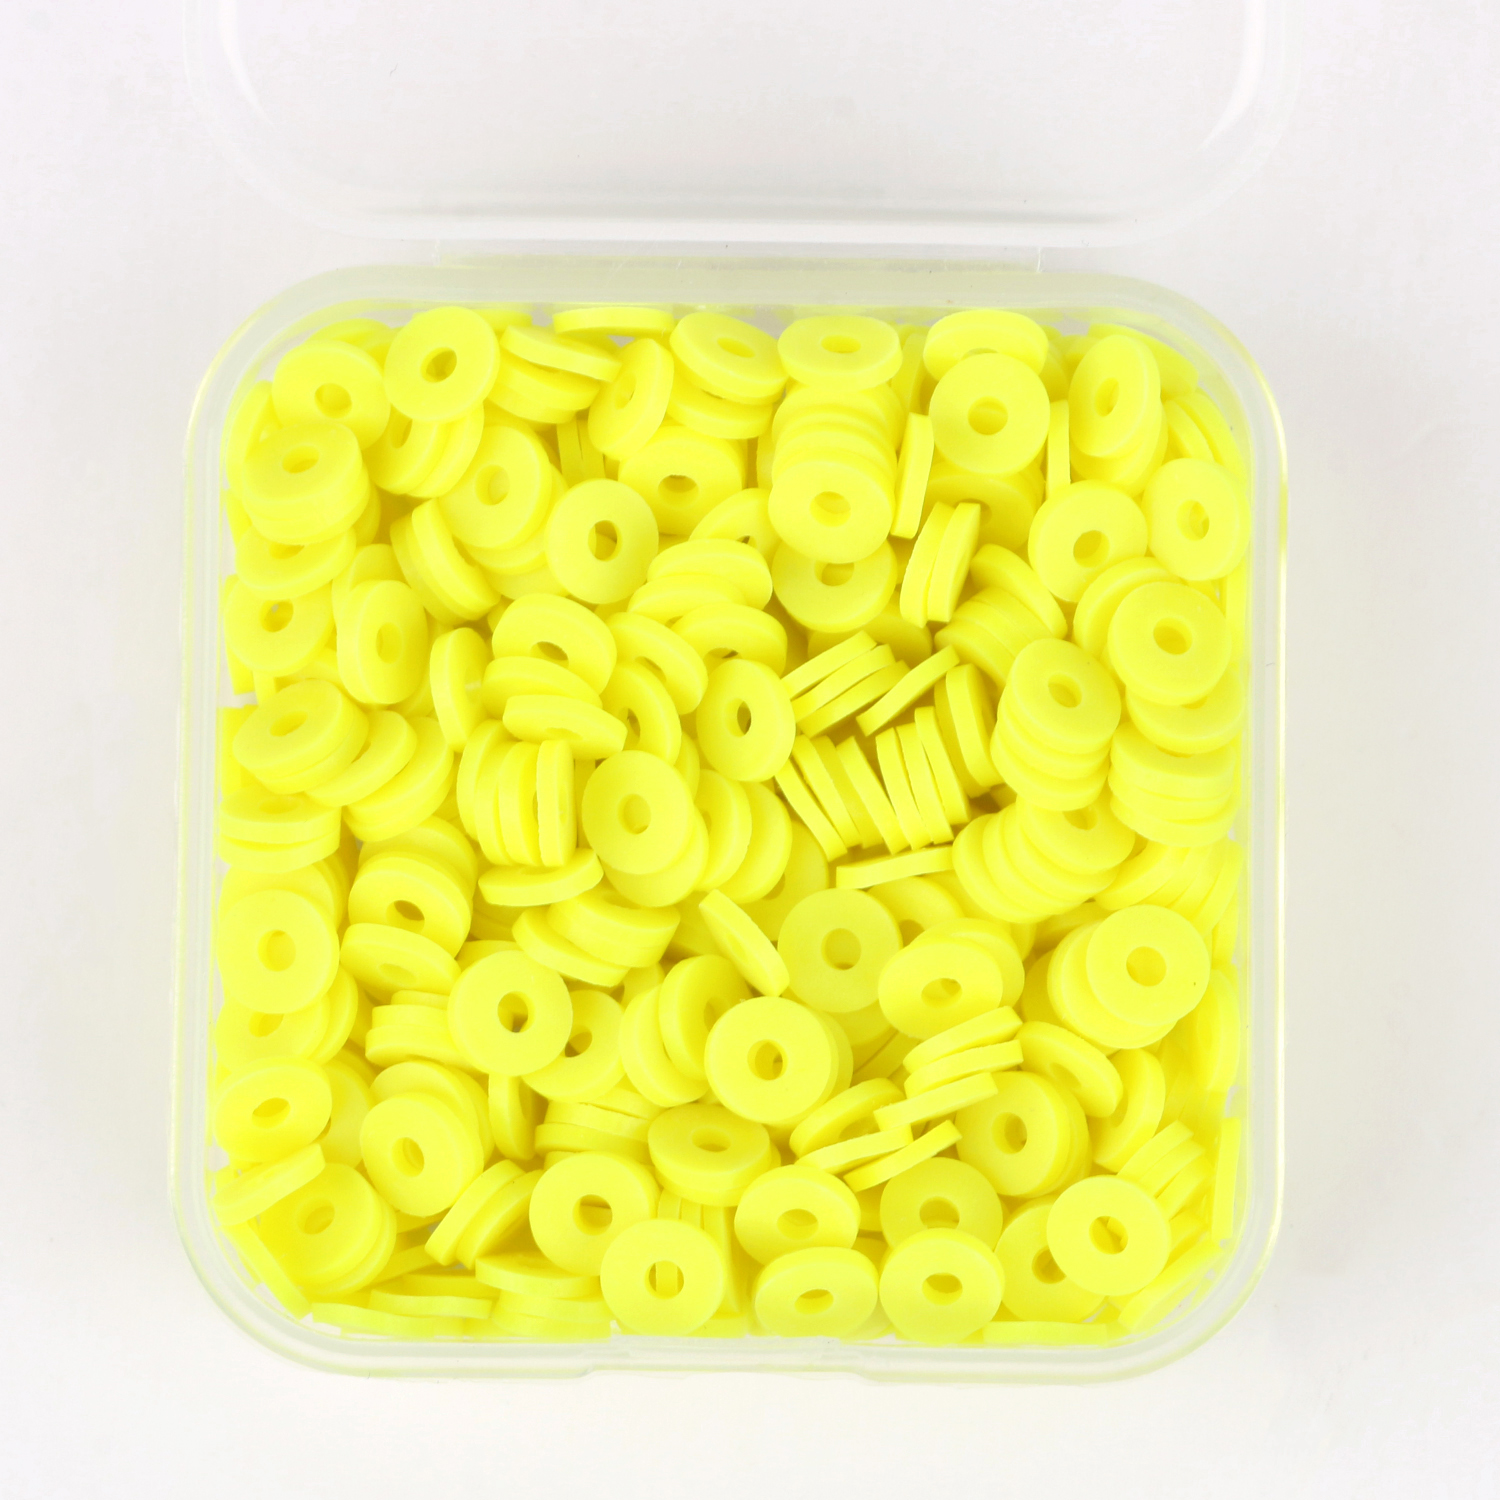 4mm 330pcs/Strip Yellow Clay Beads Slice Clay Spacer Beads Polymer